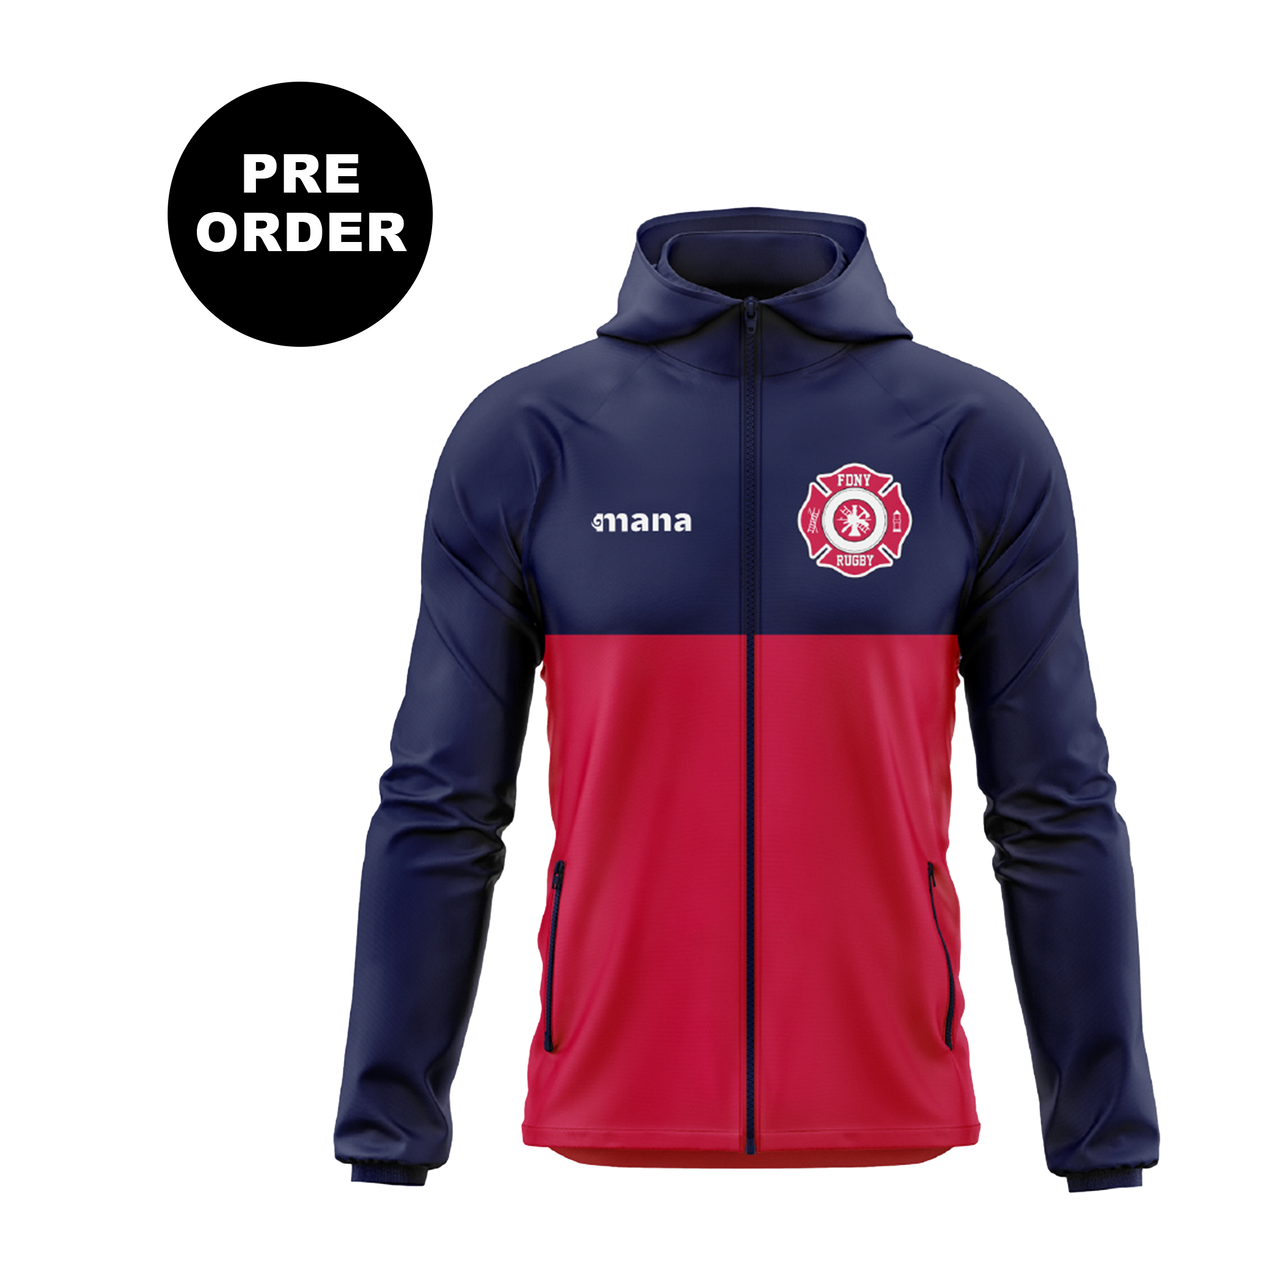 FDNY Rugby Warm Up Jacket